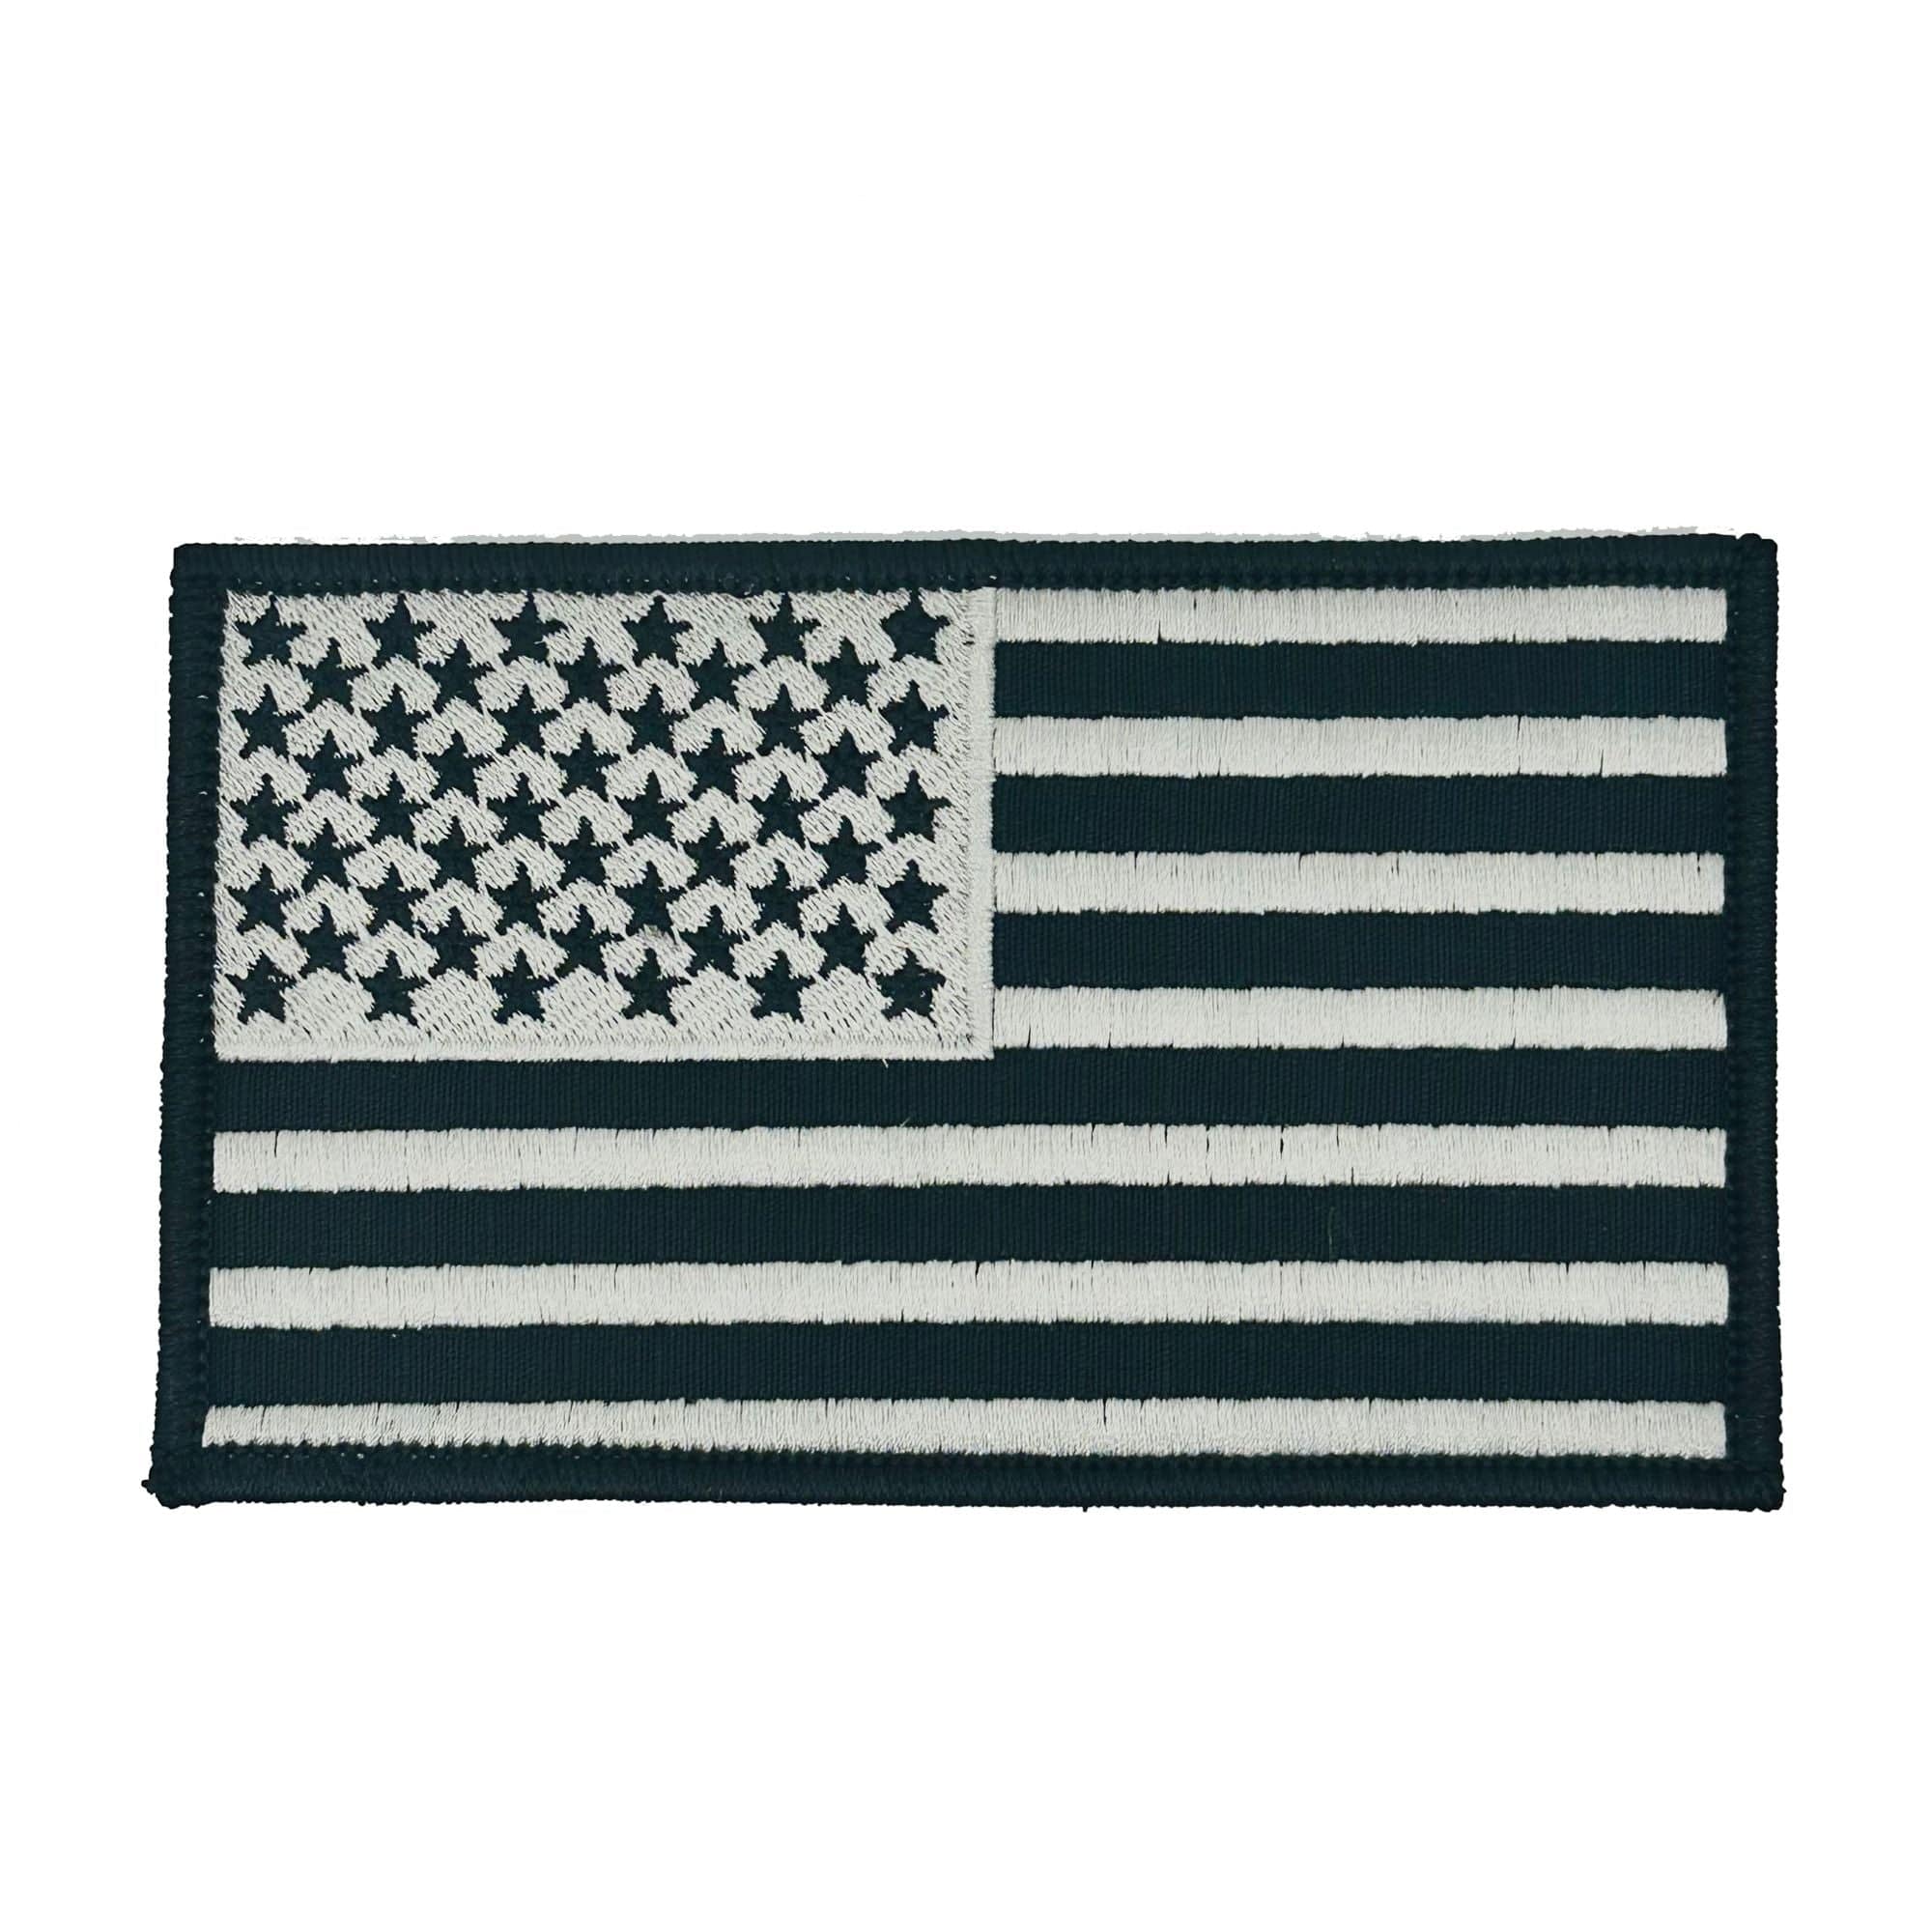 Tactical Gear Junkie Patches Black w/Silver US Flag - 3x5 Patch - Multiple Colors